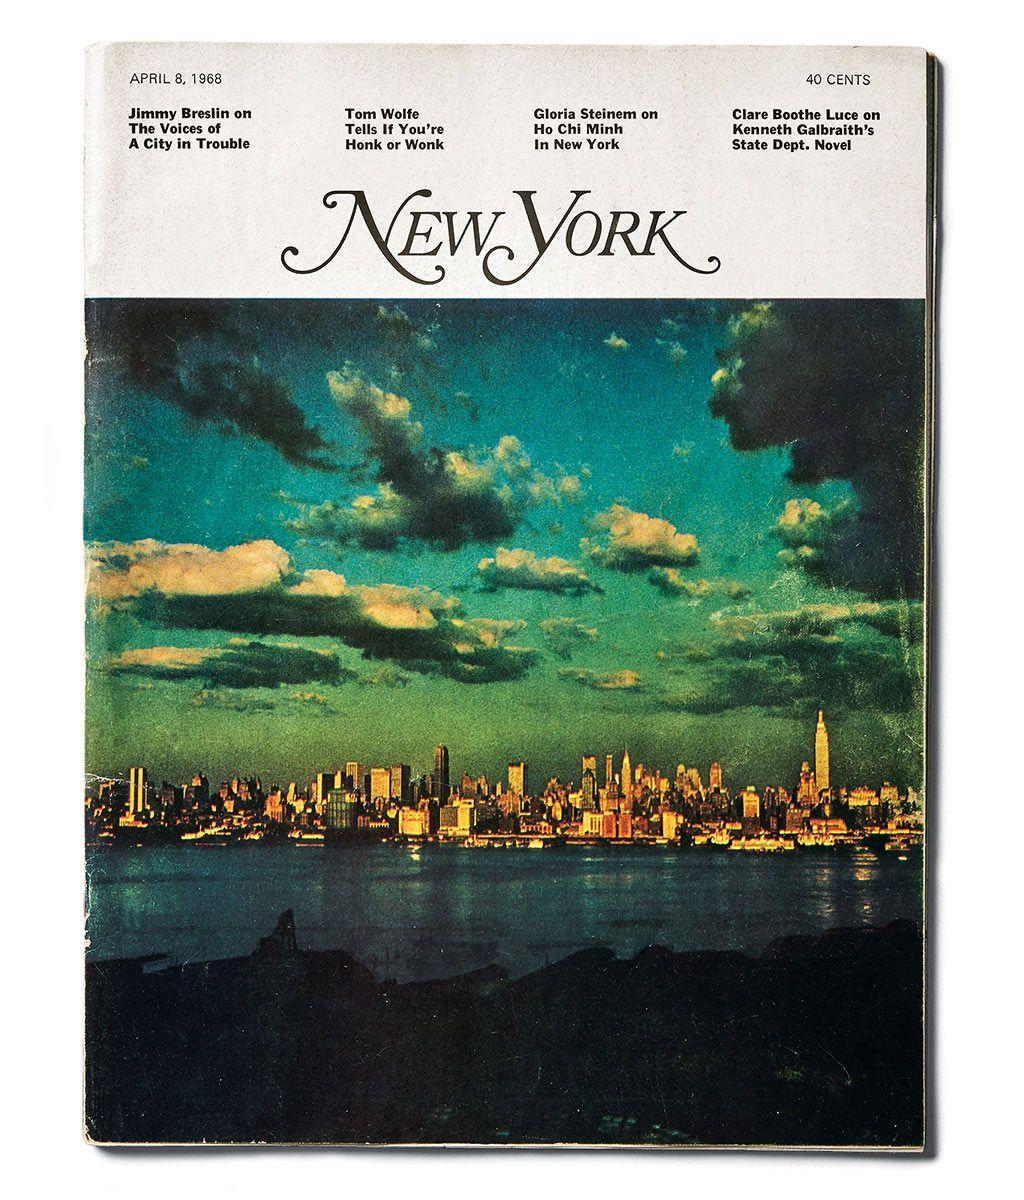 New York Magazine Logo - New York Magazine: An Oral History of the Early Days